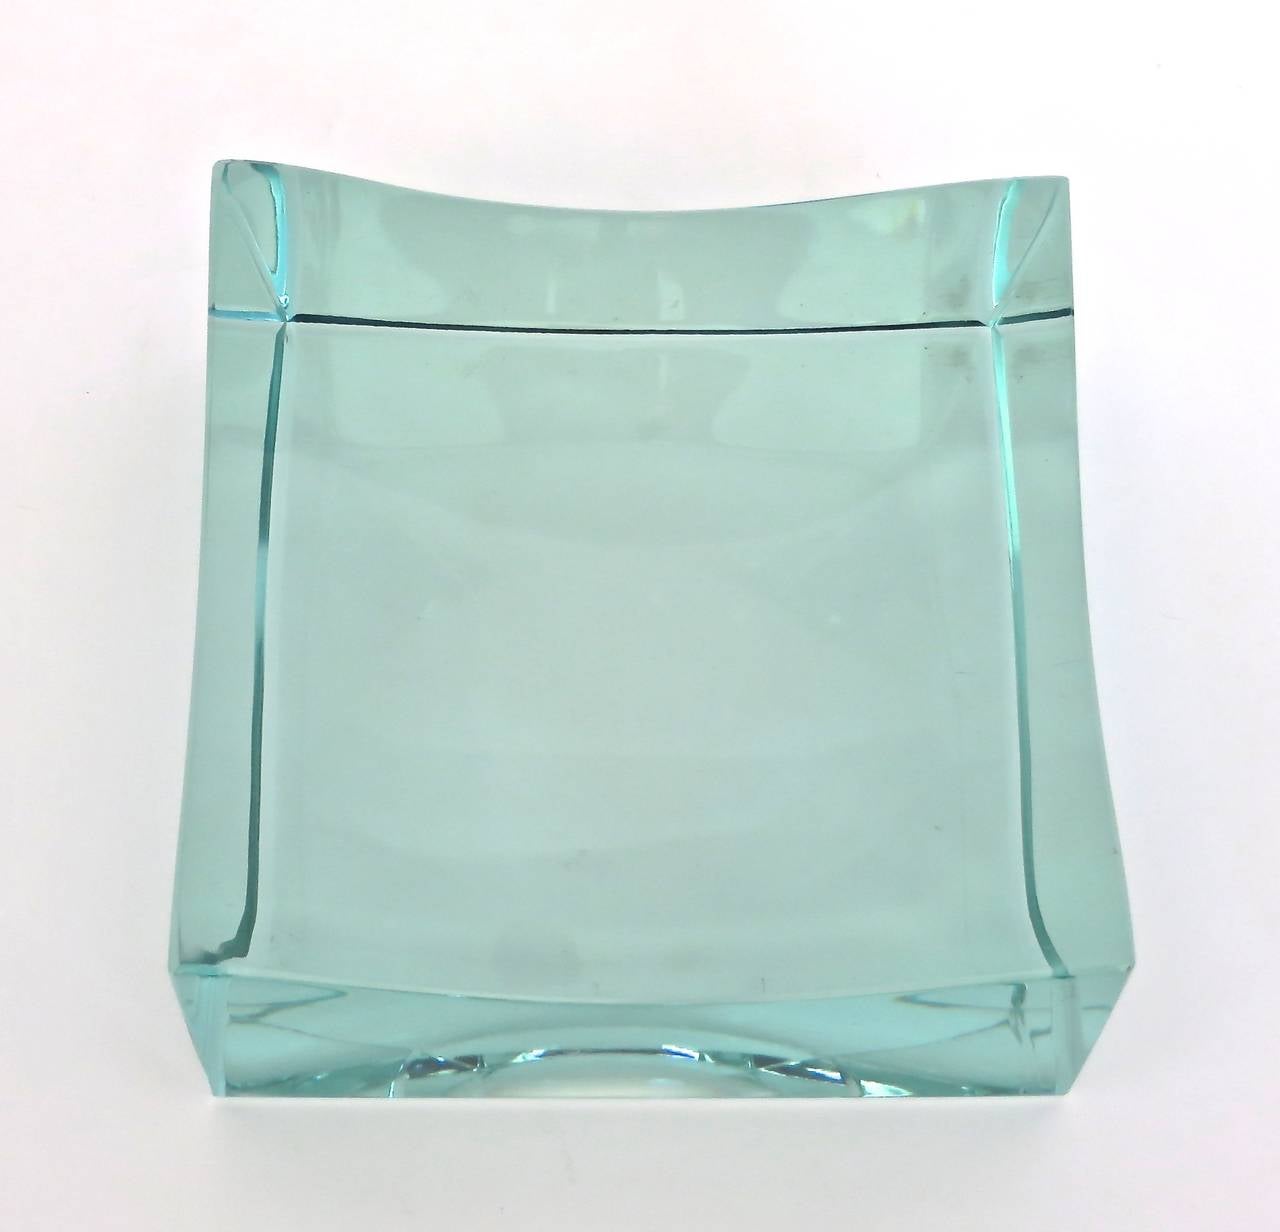 Fontana Arte signed vide poche. Italian cast glass with makers mark FX on the side. Clear polished crystal. The lines seen in the photos are reflections from other objects. There are no lines in the object.
No chips or cracks. Perfect condition.